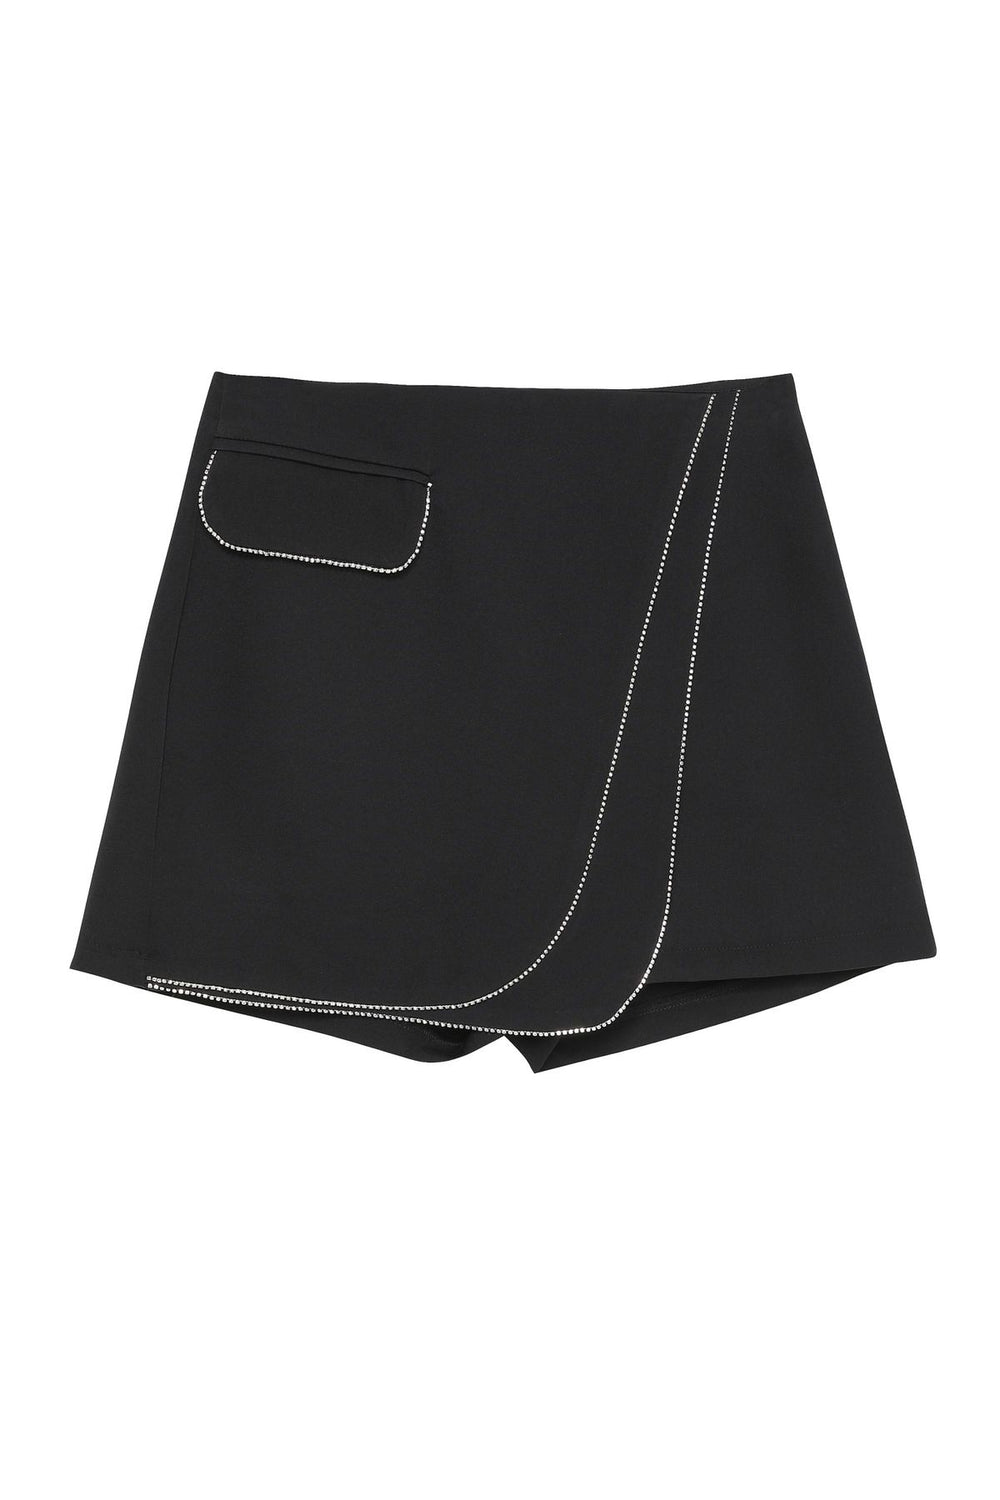 Mini Short Skirt with Stone Accessories Black